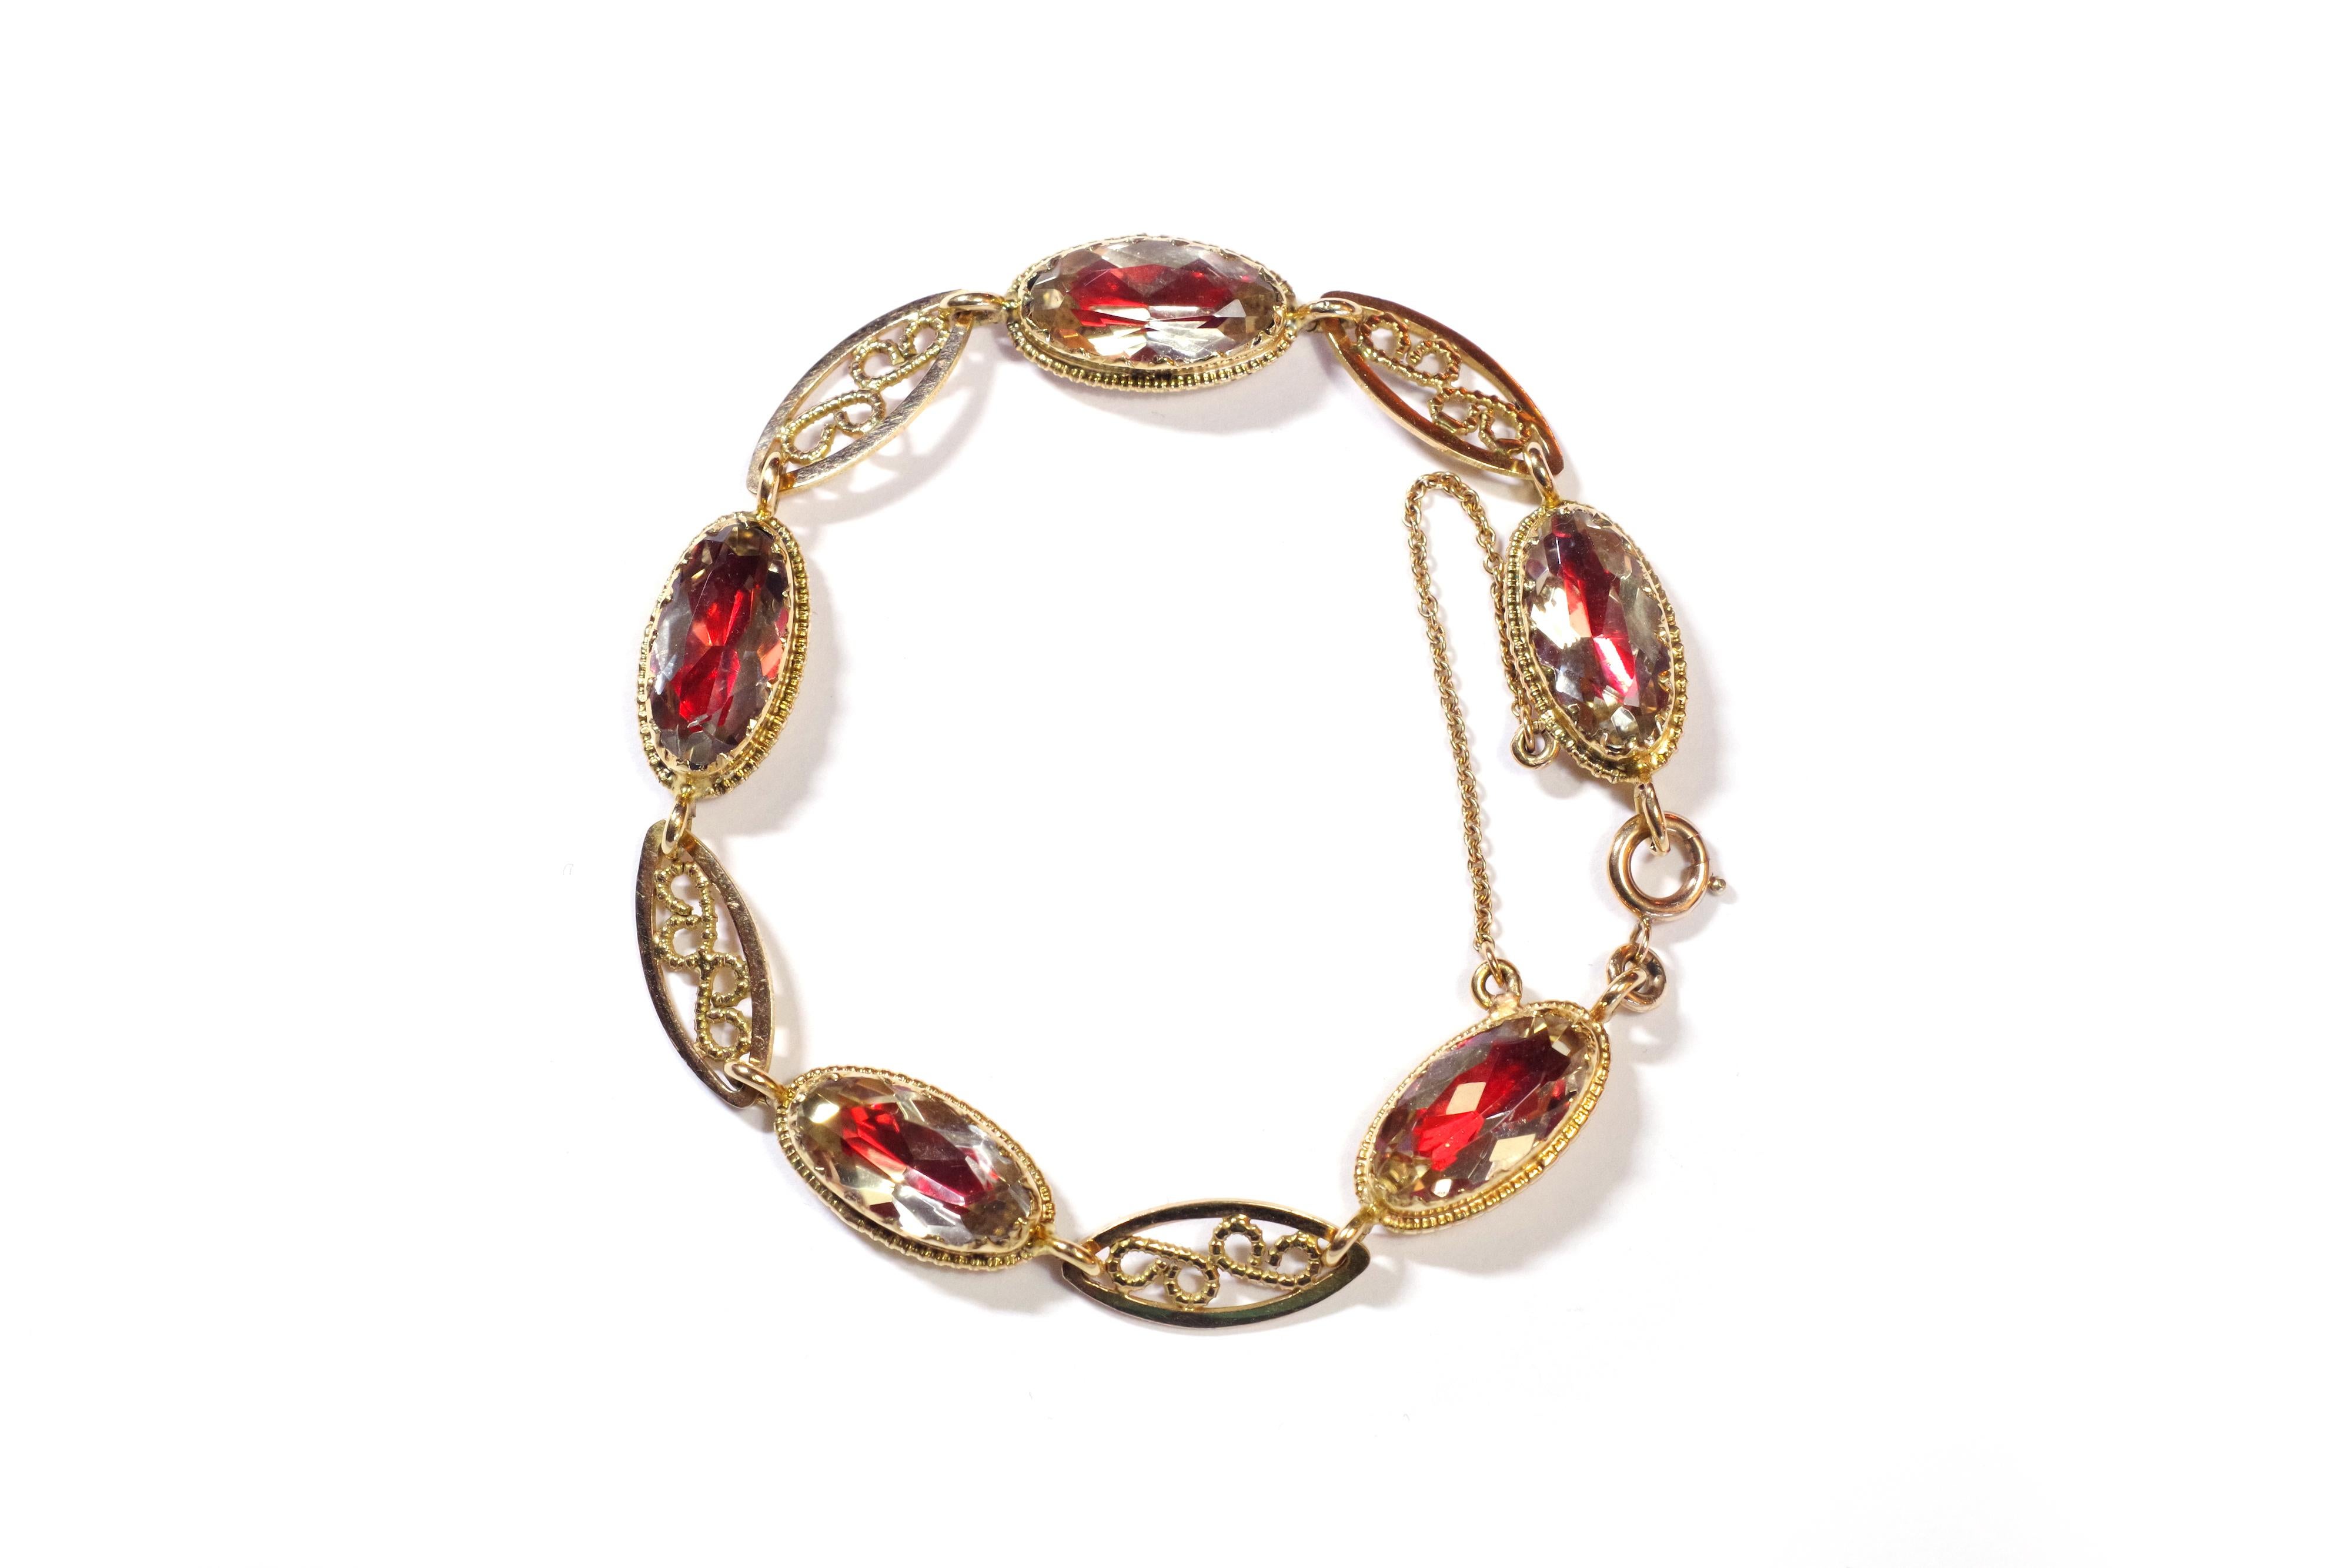 French regional citrine bracelet in yellow gold 18 karats. This bracelet is composed of five oval citrines faceted on red foils, set in a closed and curved setting. The gems are alternated with four openwork filigree links. These citrines are called